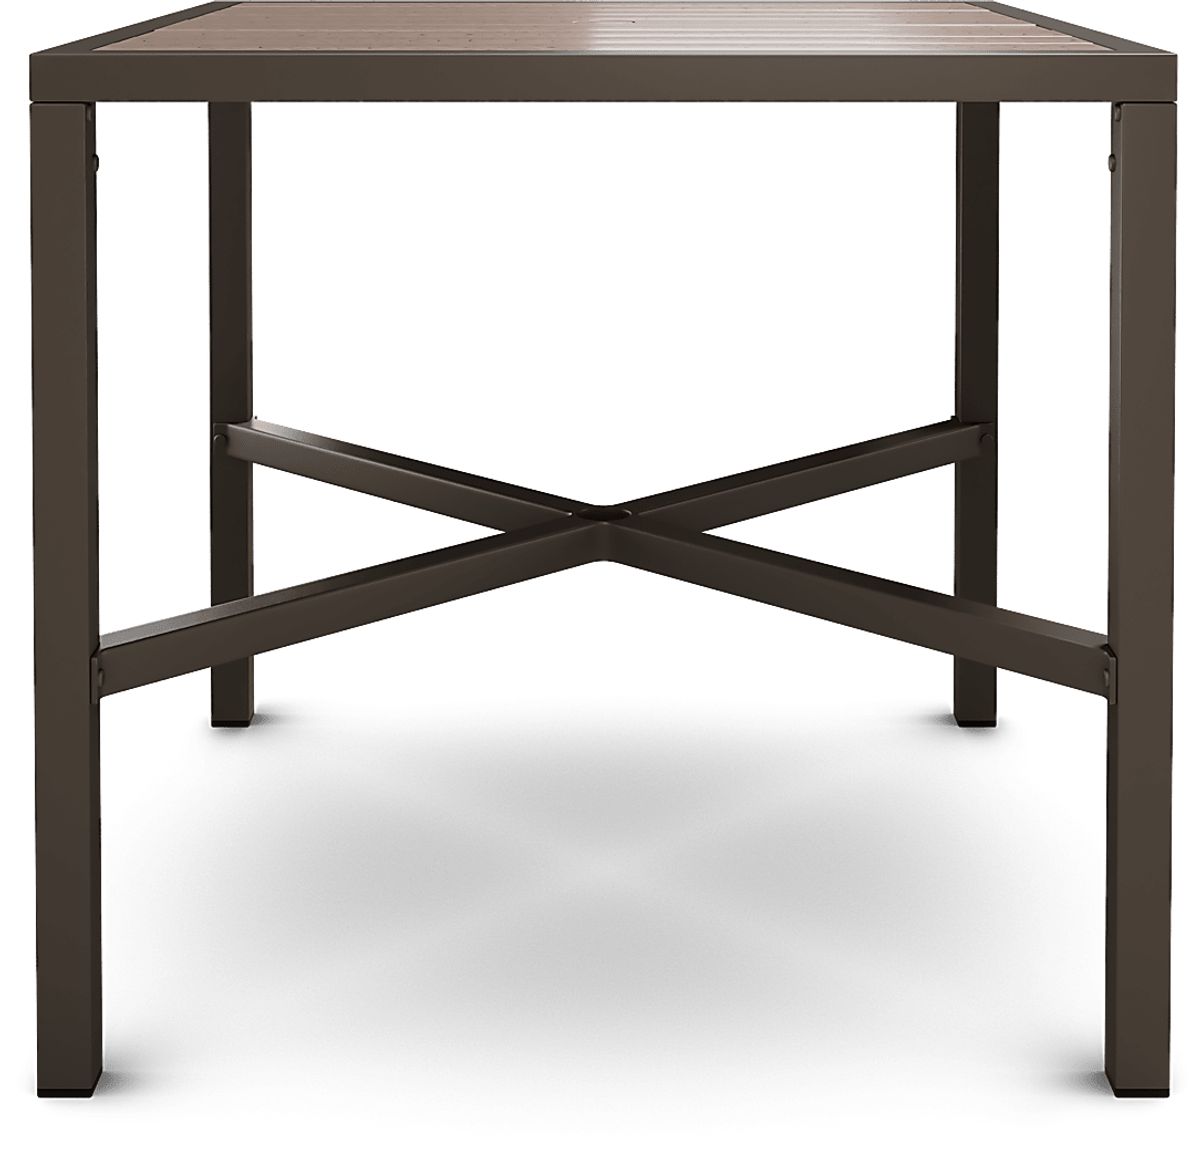 Rialto Brown 41 In. Square Bar Height Outdoor Dining Table